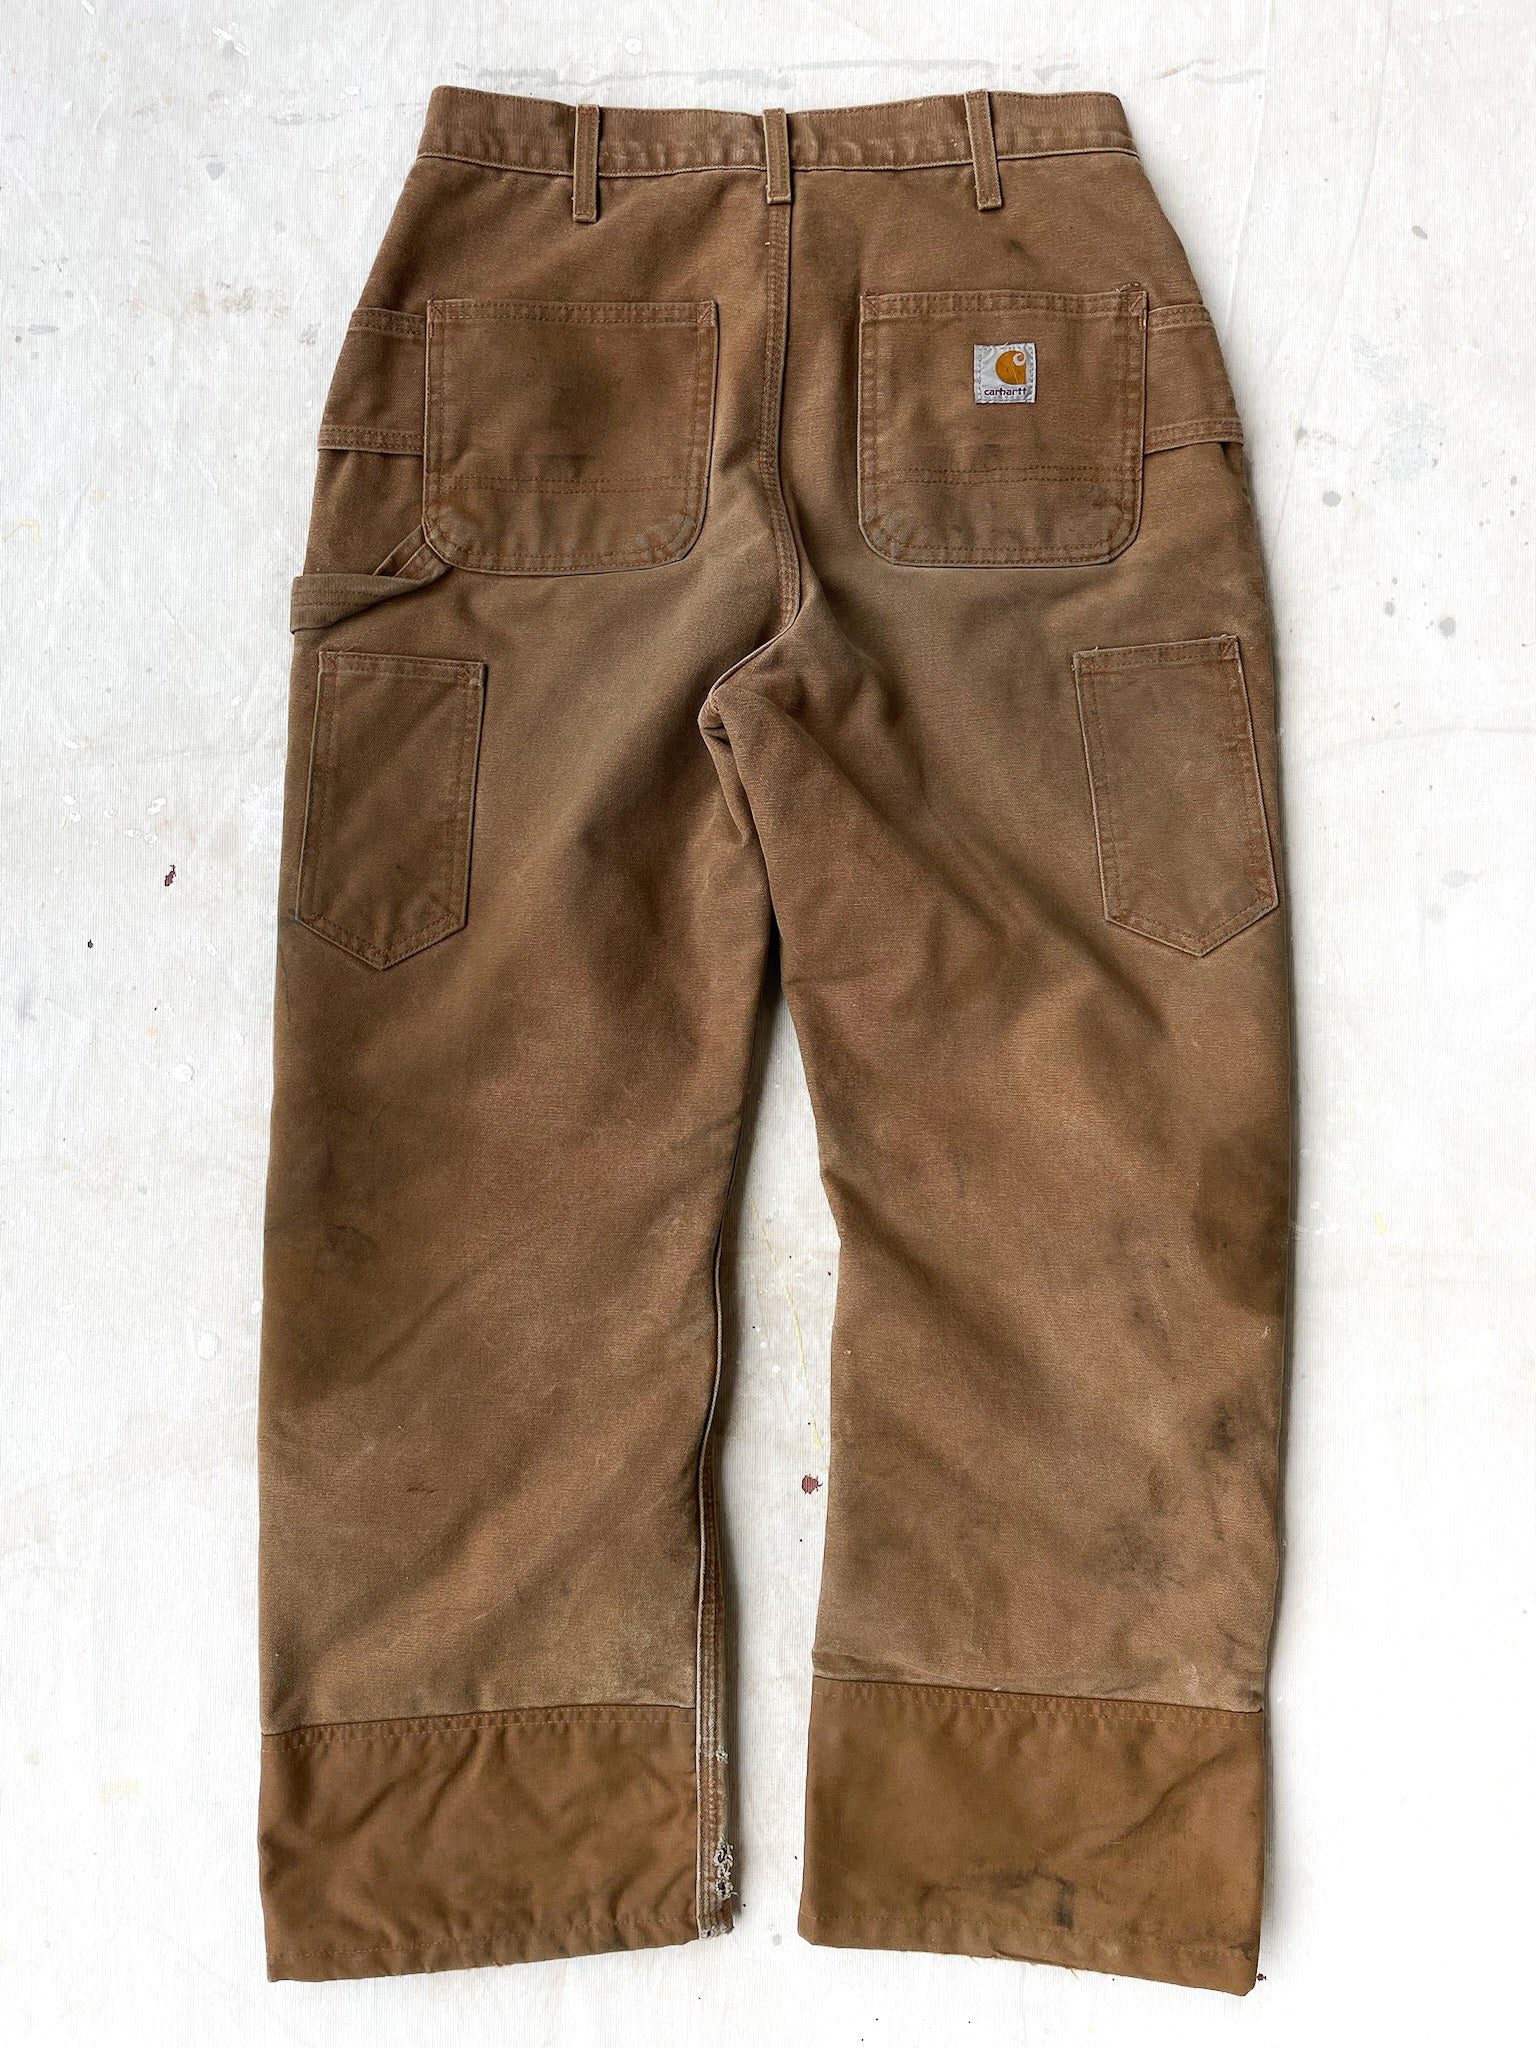 Carhartt Work Pants for sale in Chattanooga, Tennessee